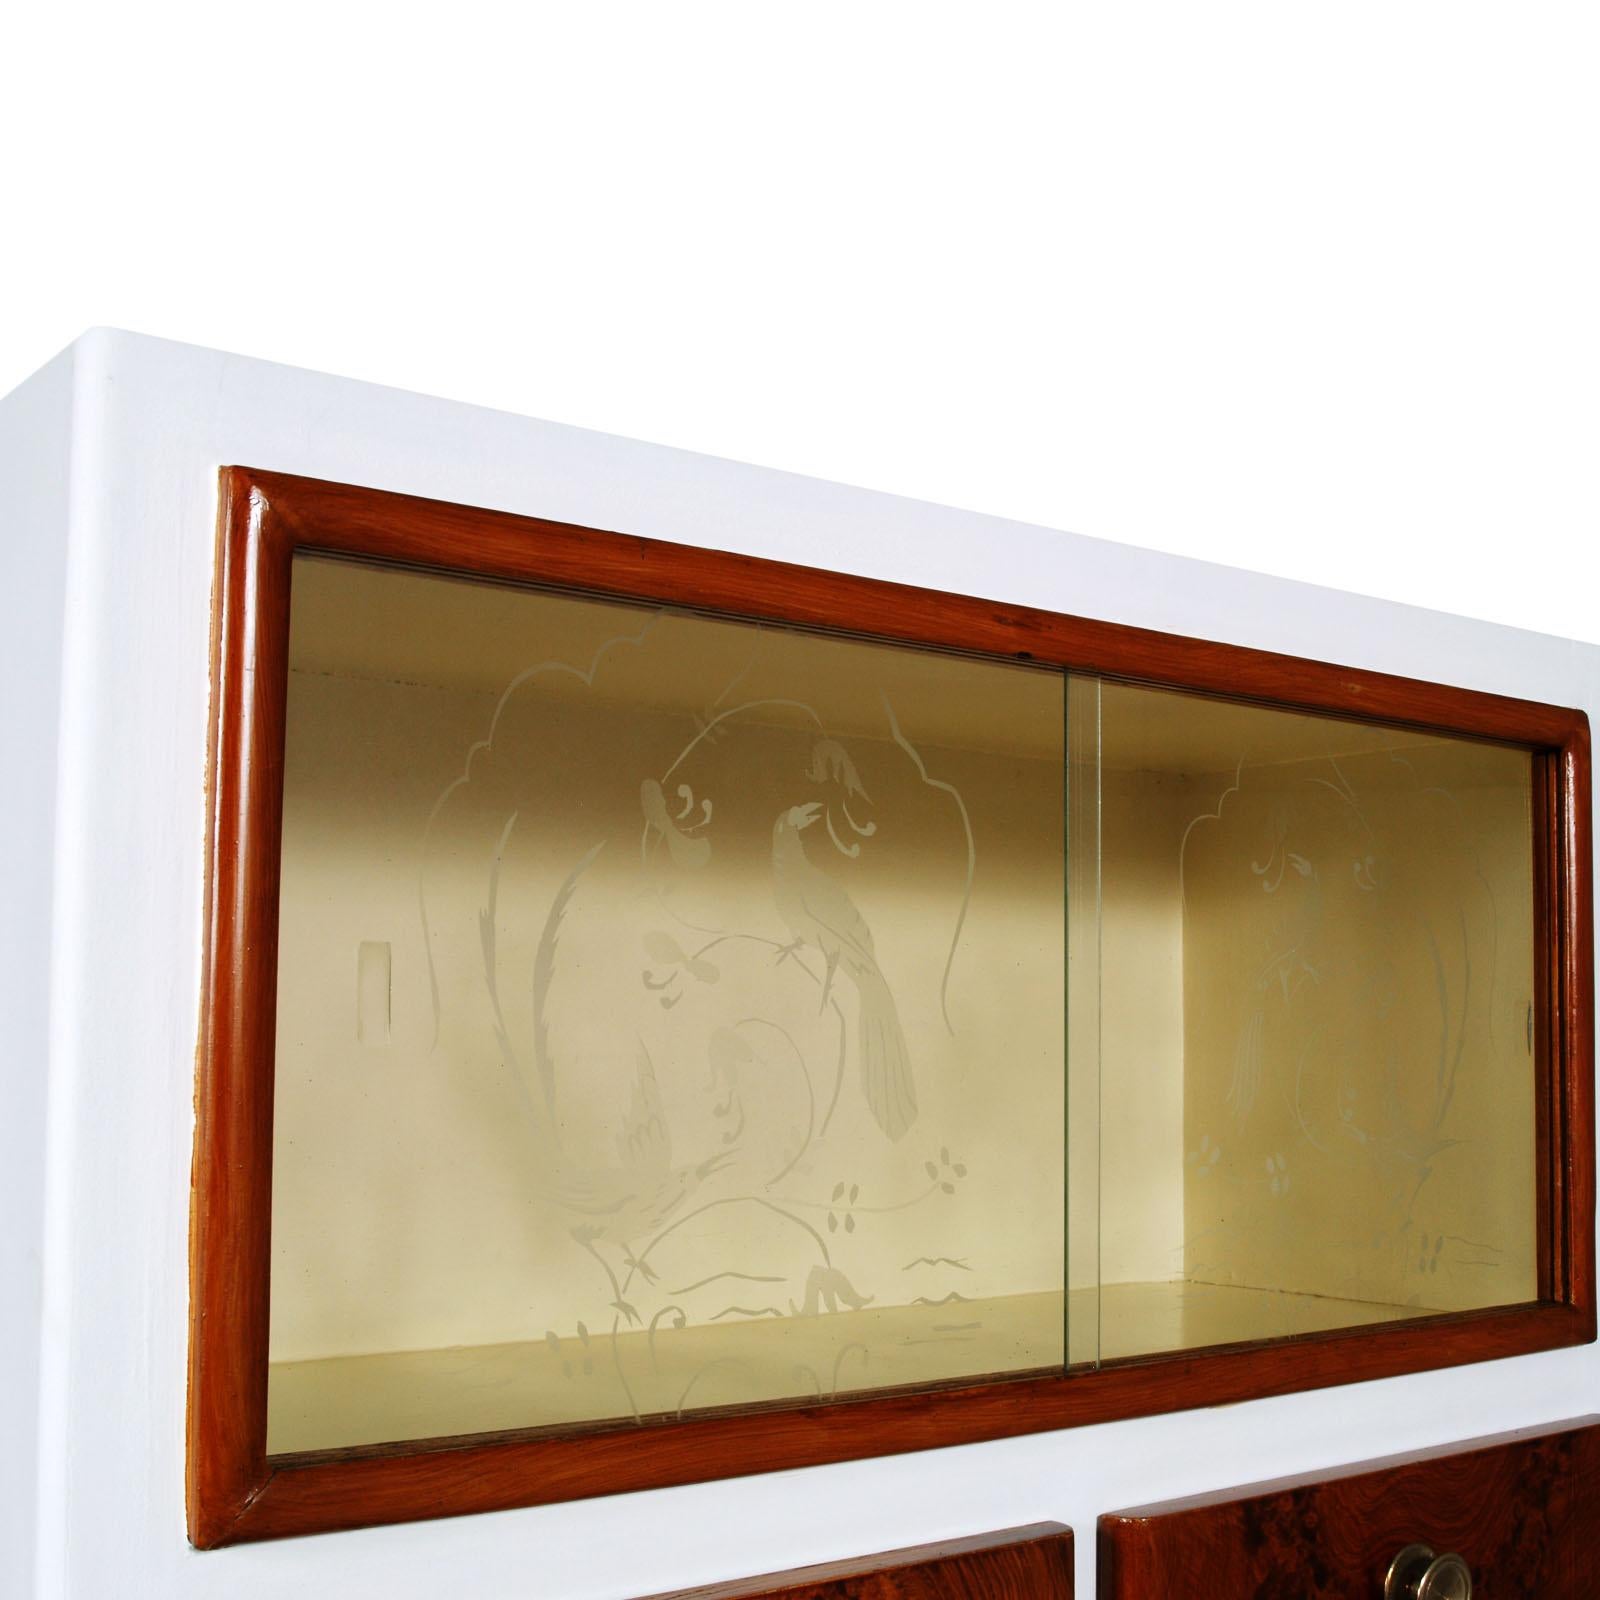 Italian Italy 1930s Art Deco Credenza Display Cabinet Lacquered Hand Decorated Wood For Sale